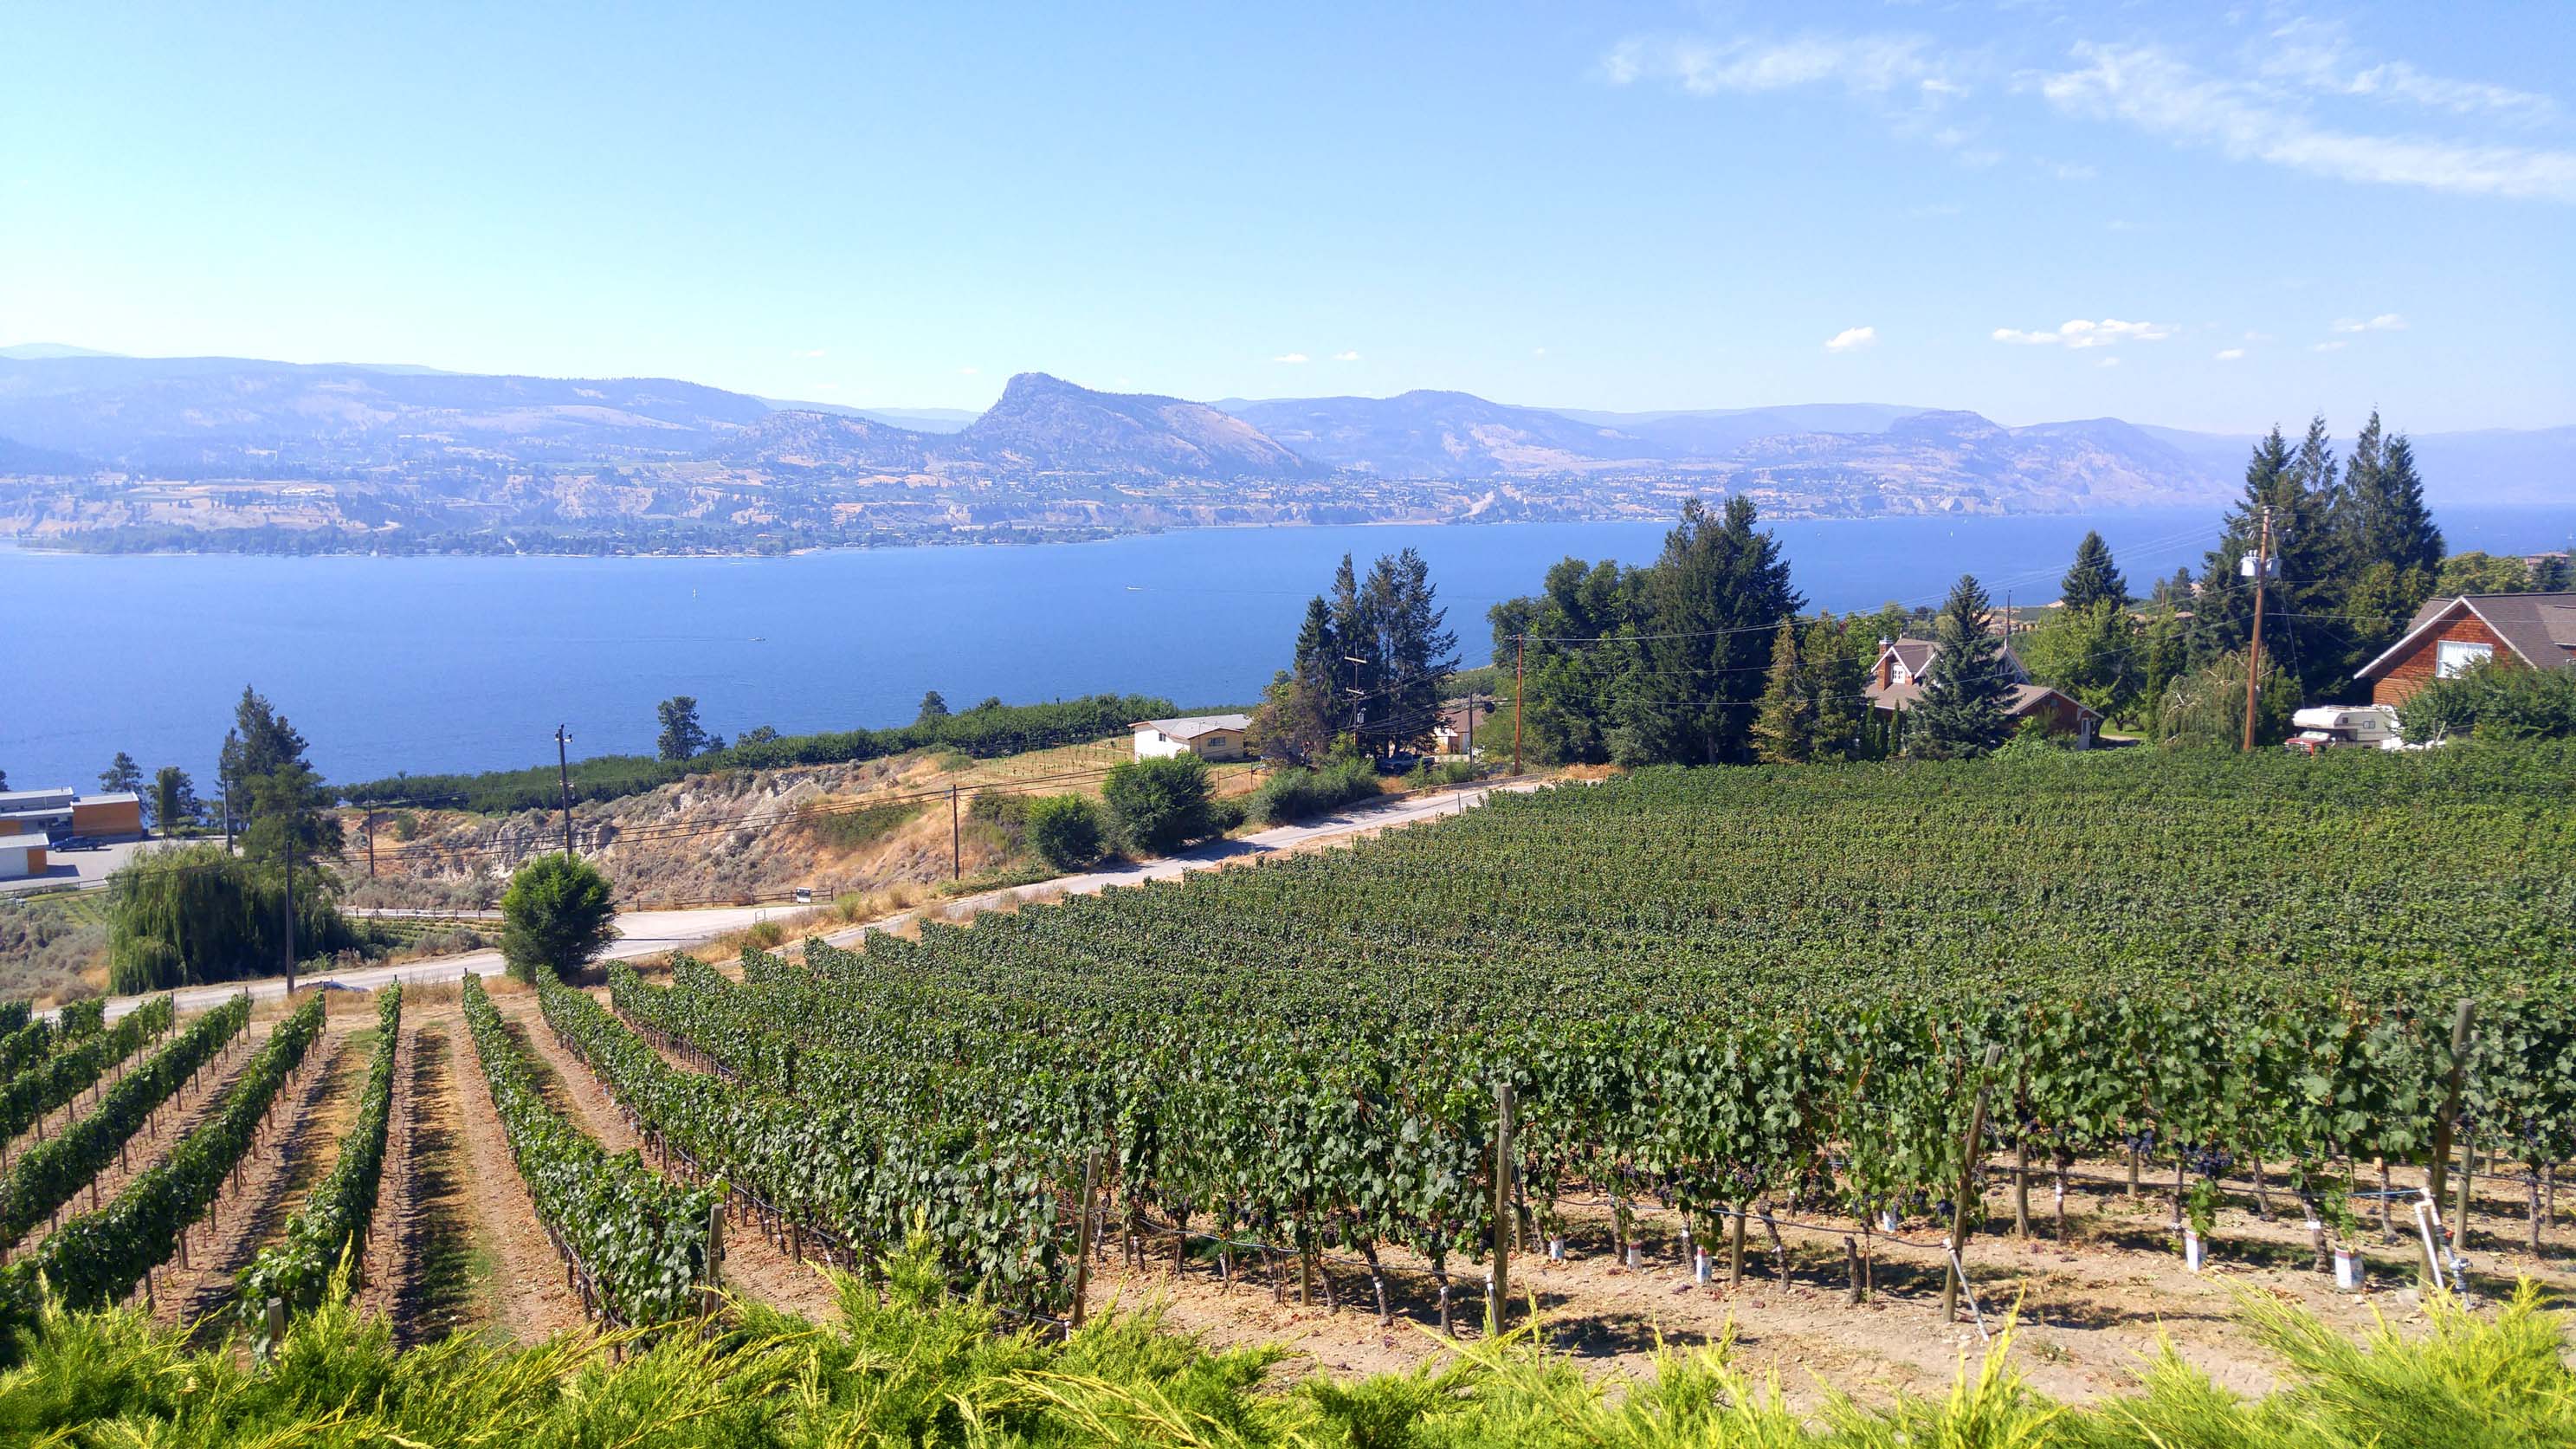 Best Things to Do in the Okanagan Valley, British Columbia & Guide